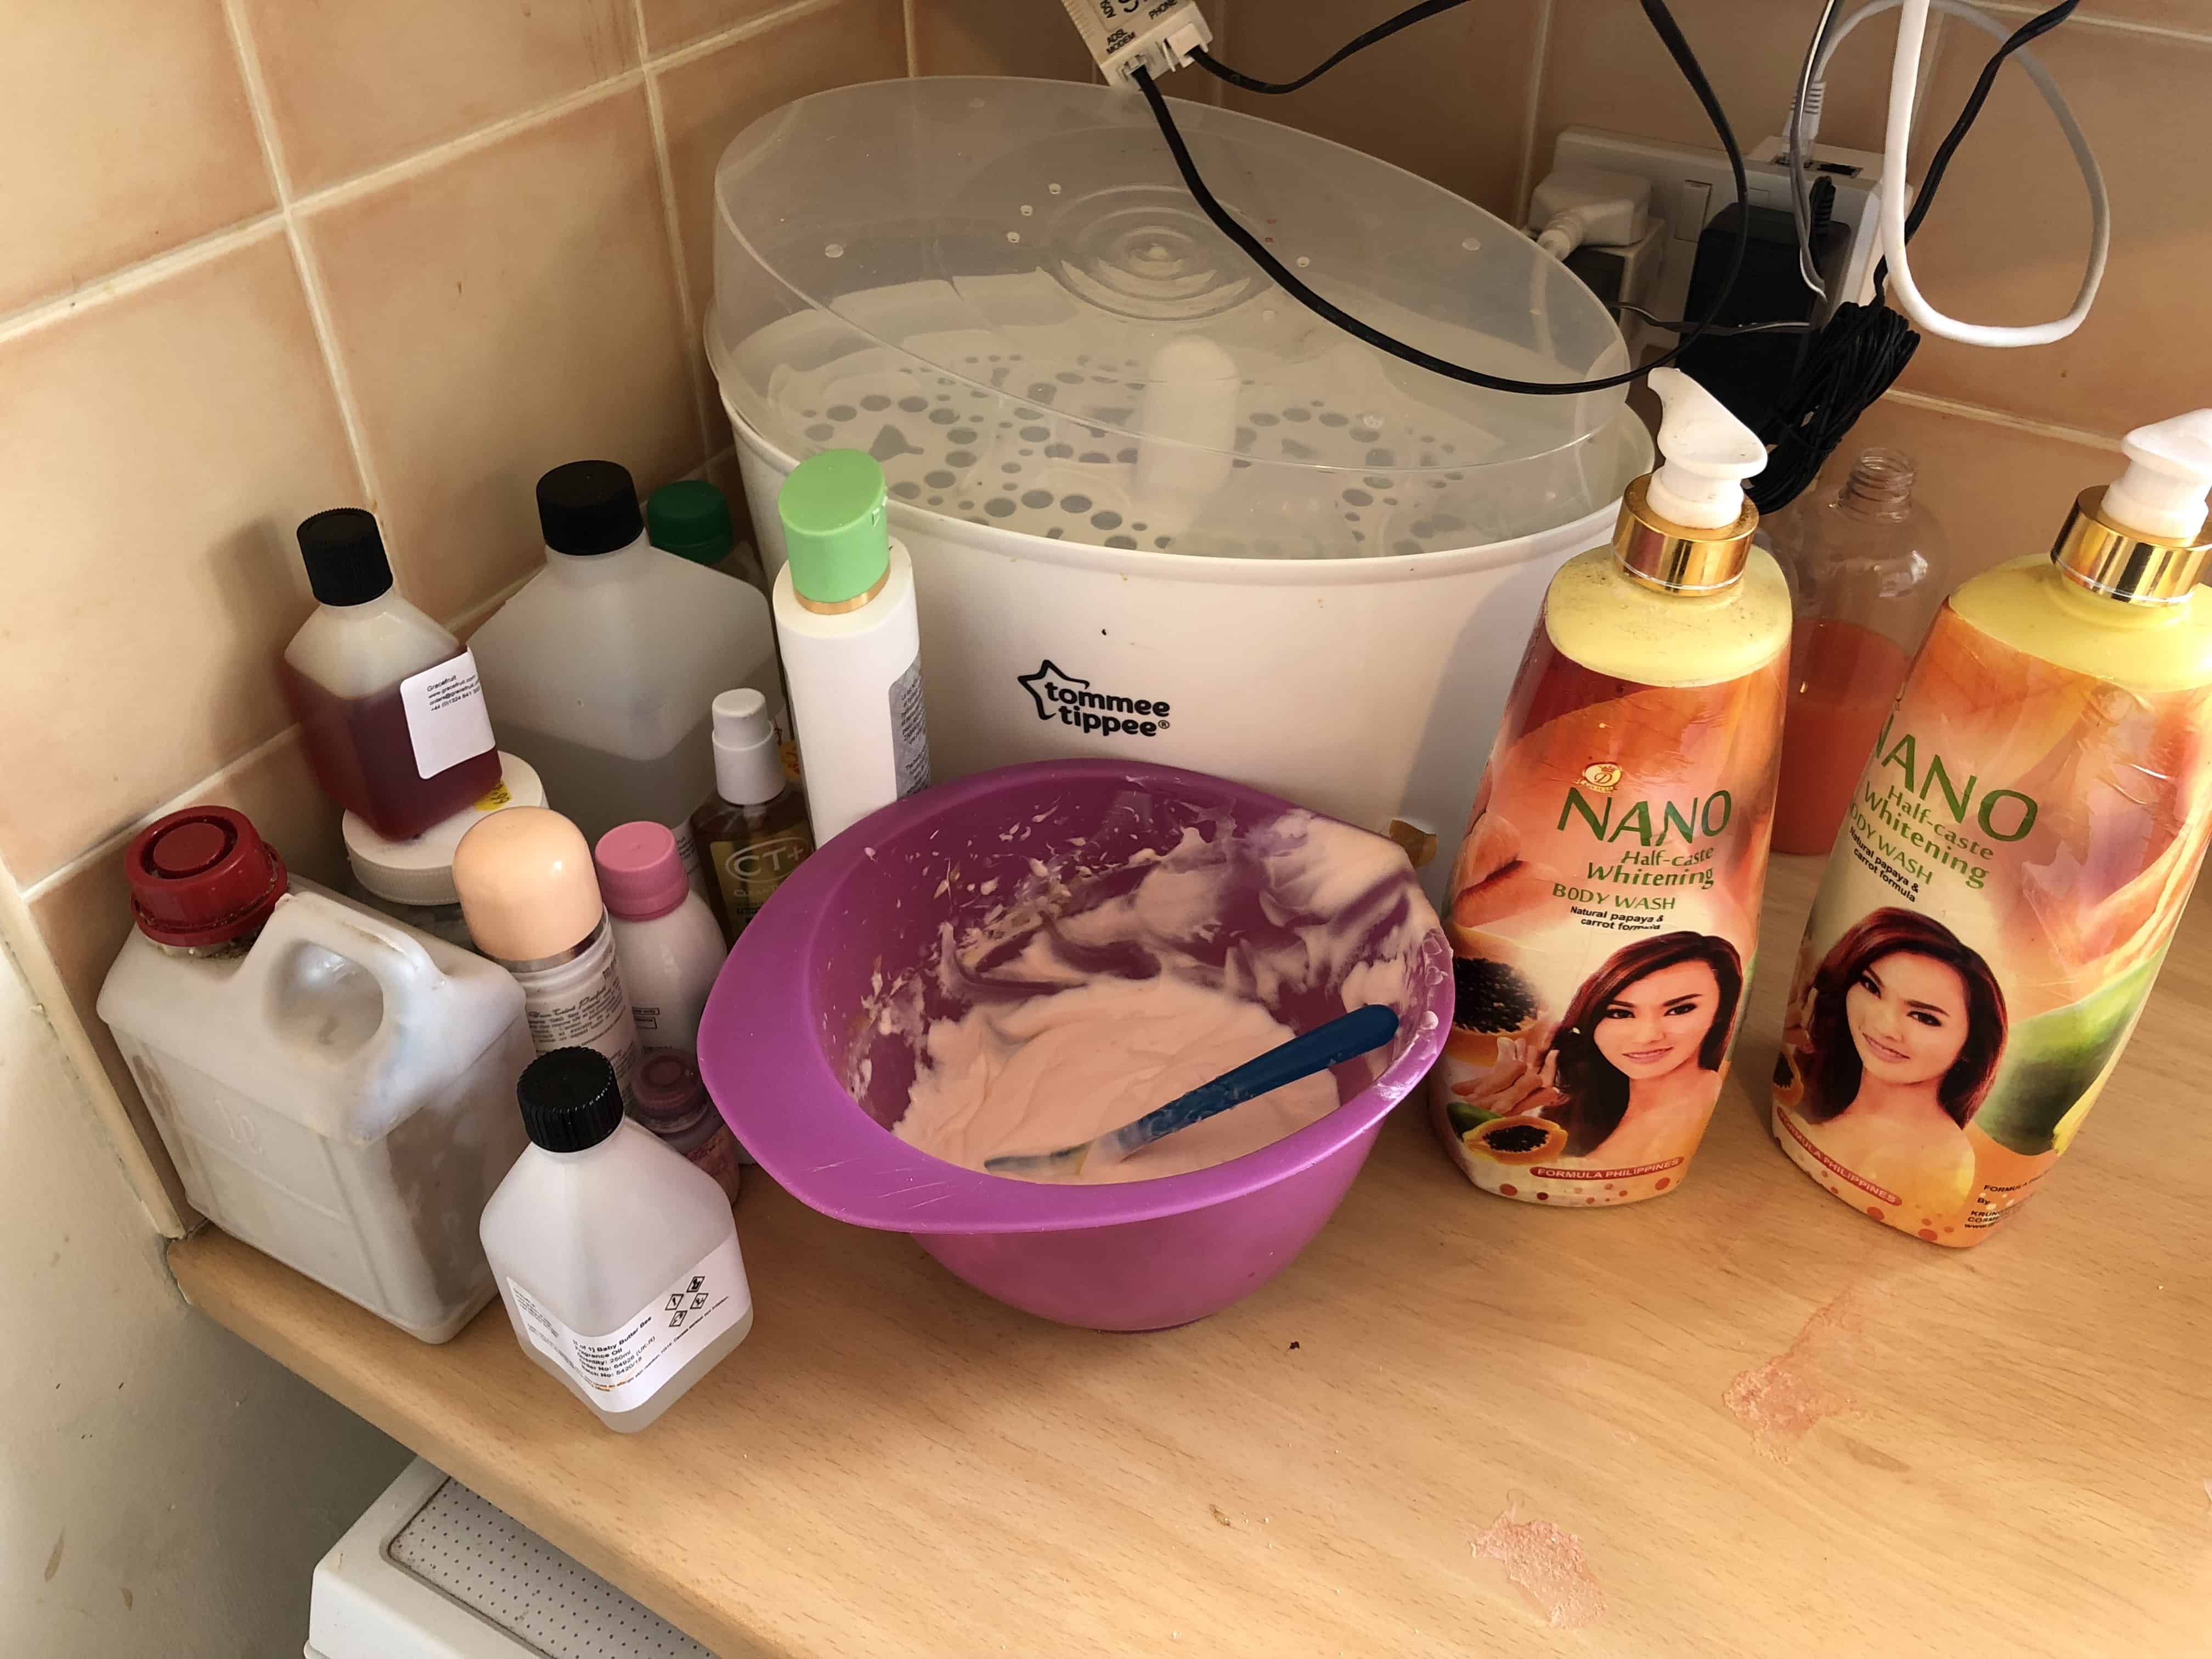 The couple were using a mixing bowl to concoct their banned skin bleaching products - which is pictured next to a baby bottle steriliser